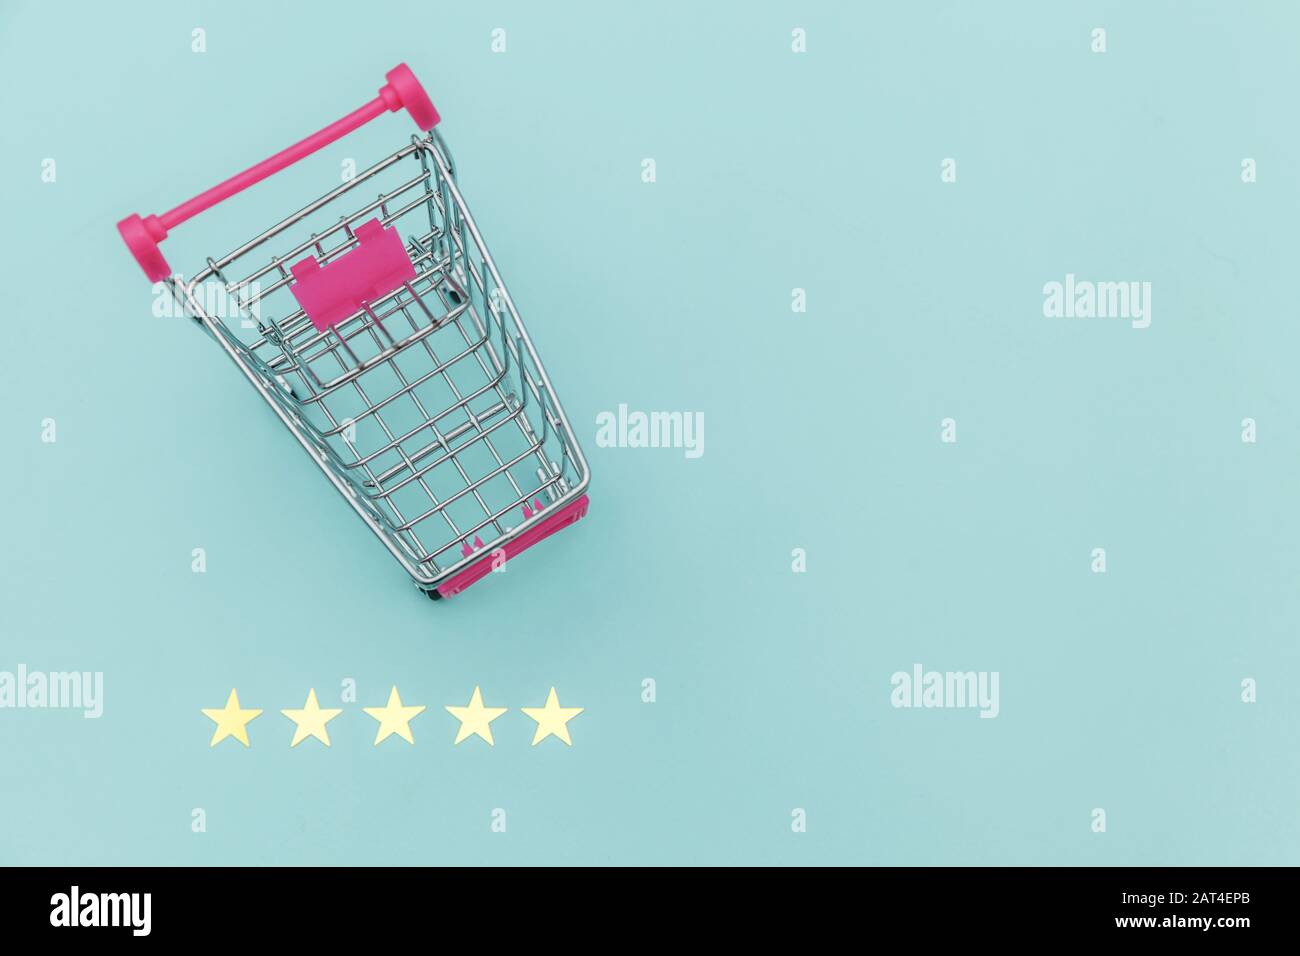 Small supermarket grocery push cart for shopping toy with wheels and 5 stars rating isolated on pastel blue background. Retail consumer buying online assessment and review concept Stock Photo